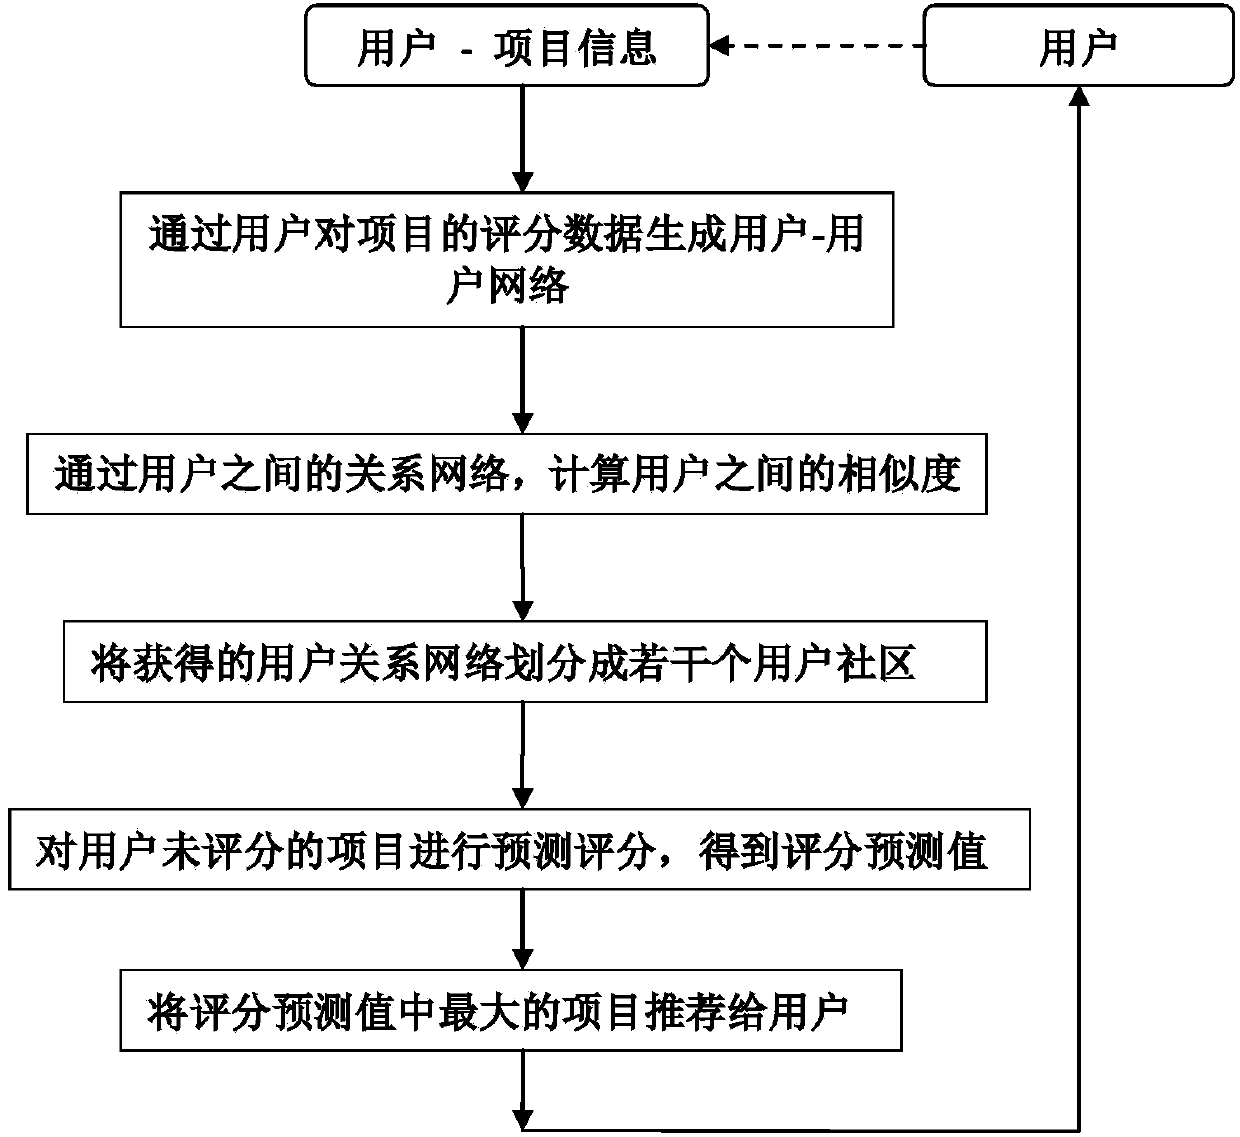 Network community based collaborative filtering recommendation method